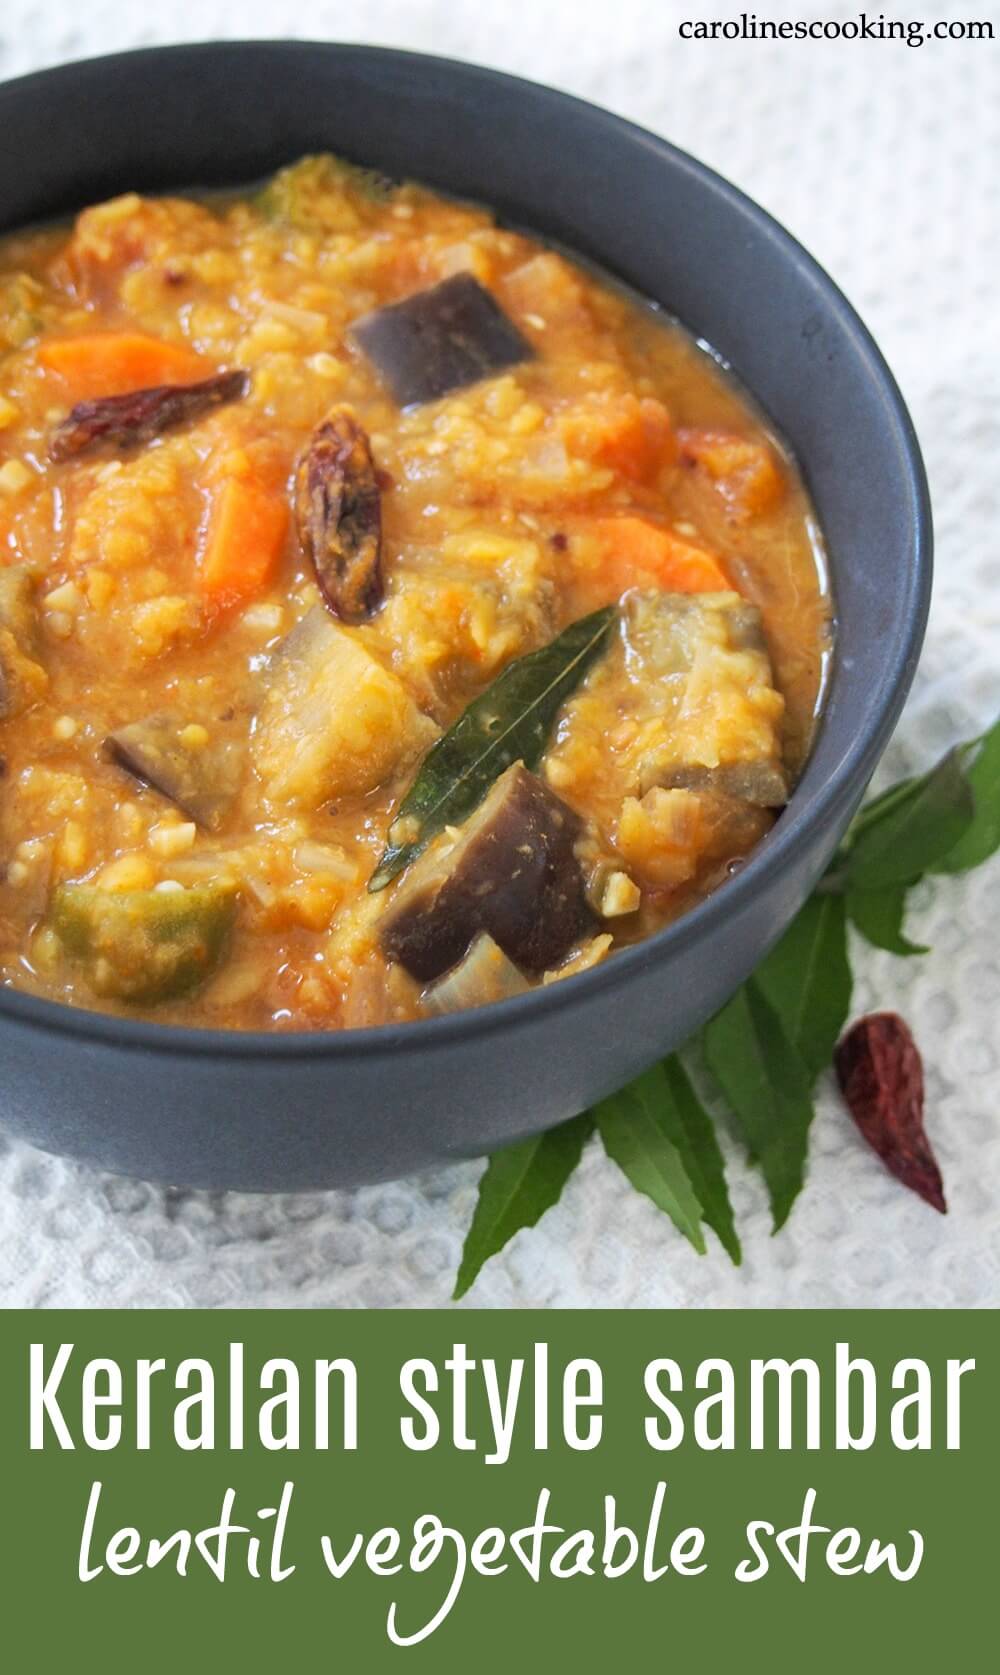 This Kerala style sambar has a tasty mix of vegetables, dal (lentils/split peas) and spices.  It's easy to make, comforting and full of delicious flavor.  Serve it simply with rice or dosa, or have it as part of a larger meal whether other vegetarian dishes like this or as you prefer.  So tasty!  #indianfood #vegetarian #vegan